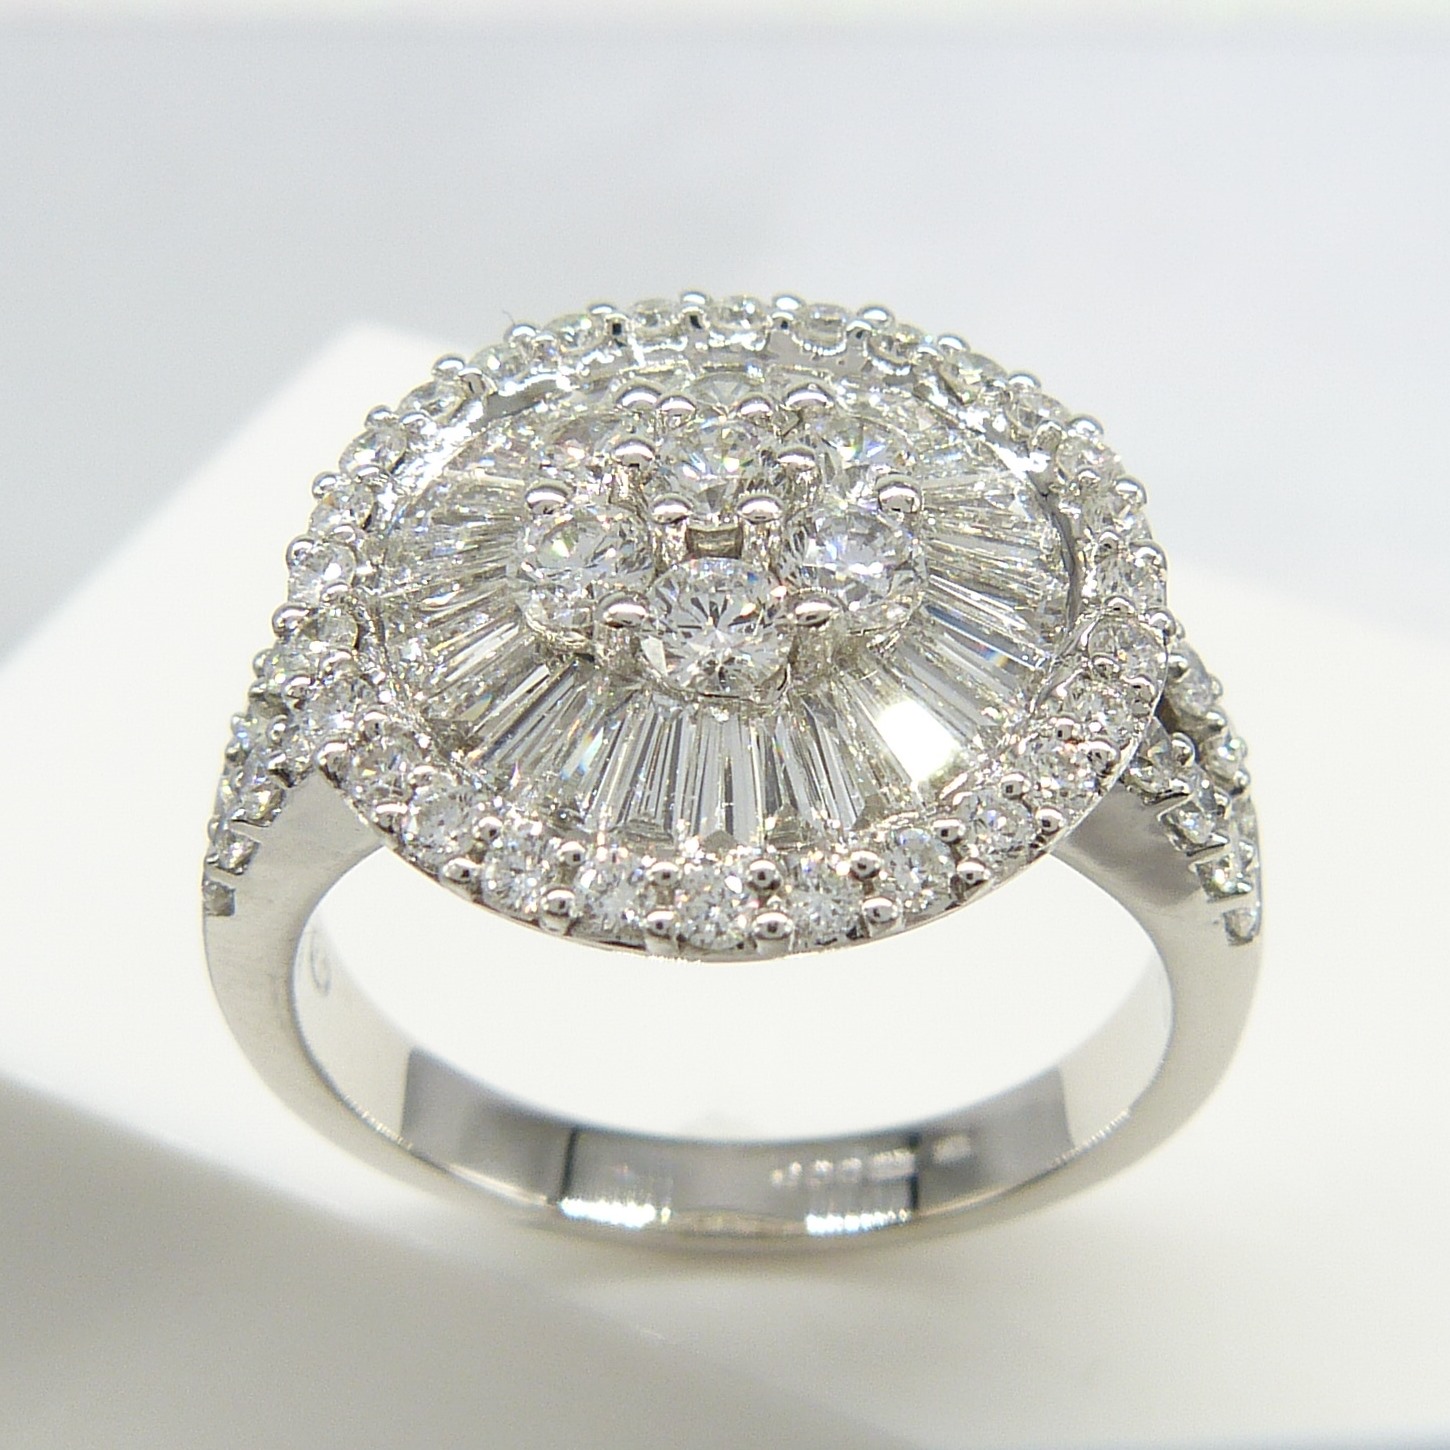 An attractive, certificated, 2.05 carat Diamond cluster ring in 18k white Gold, with Diamond